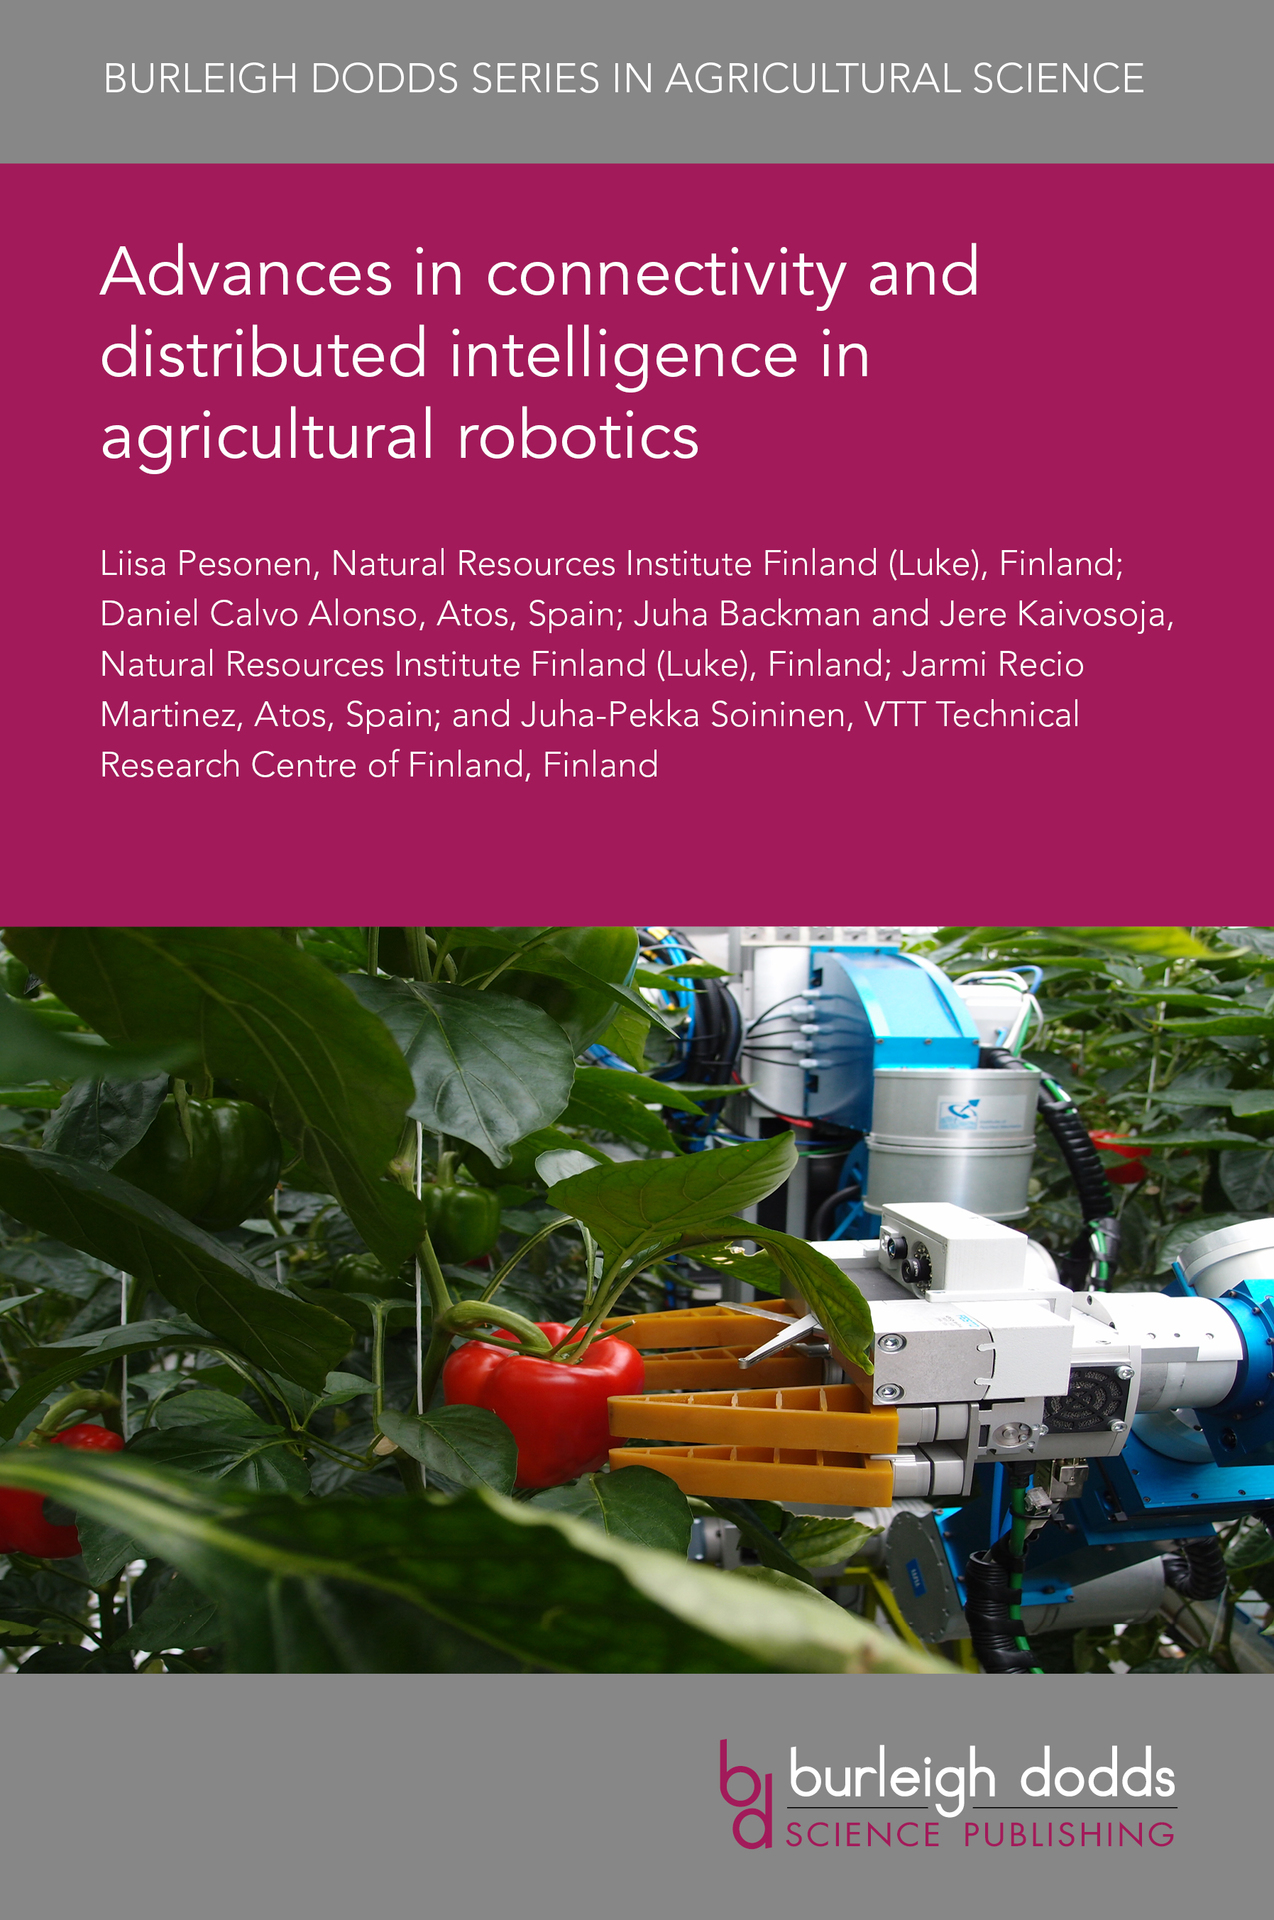 Advances in connectivity and distributed intelligence in agricultural robotics